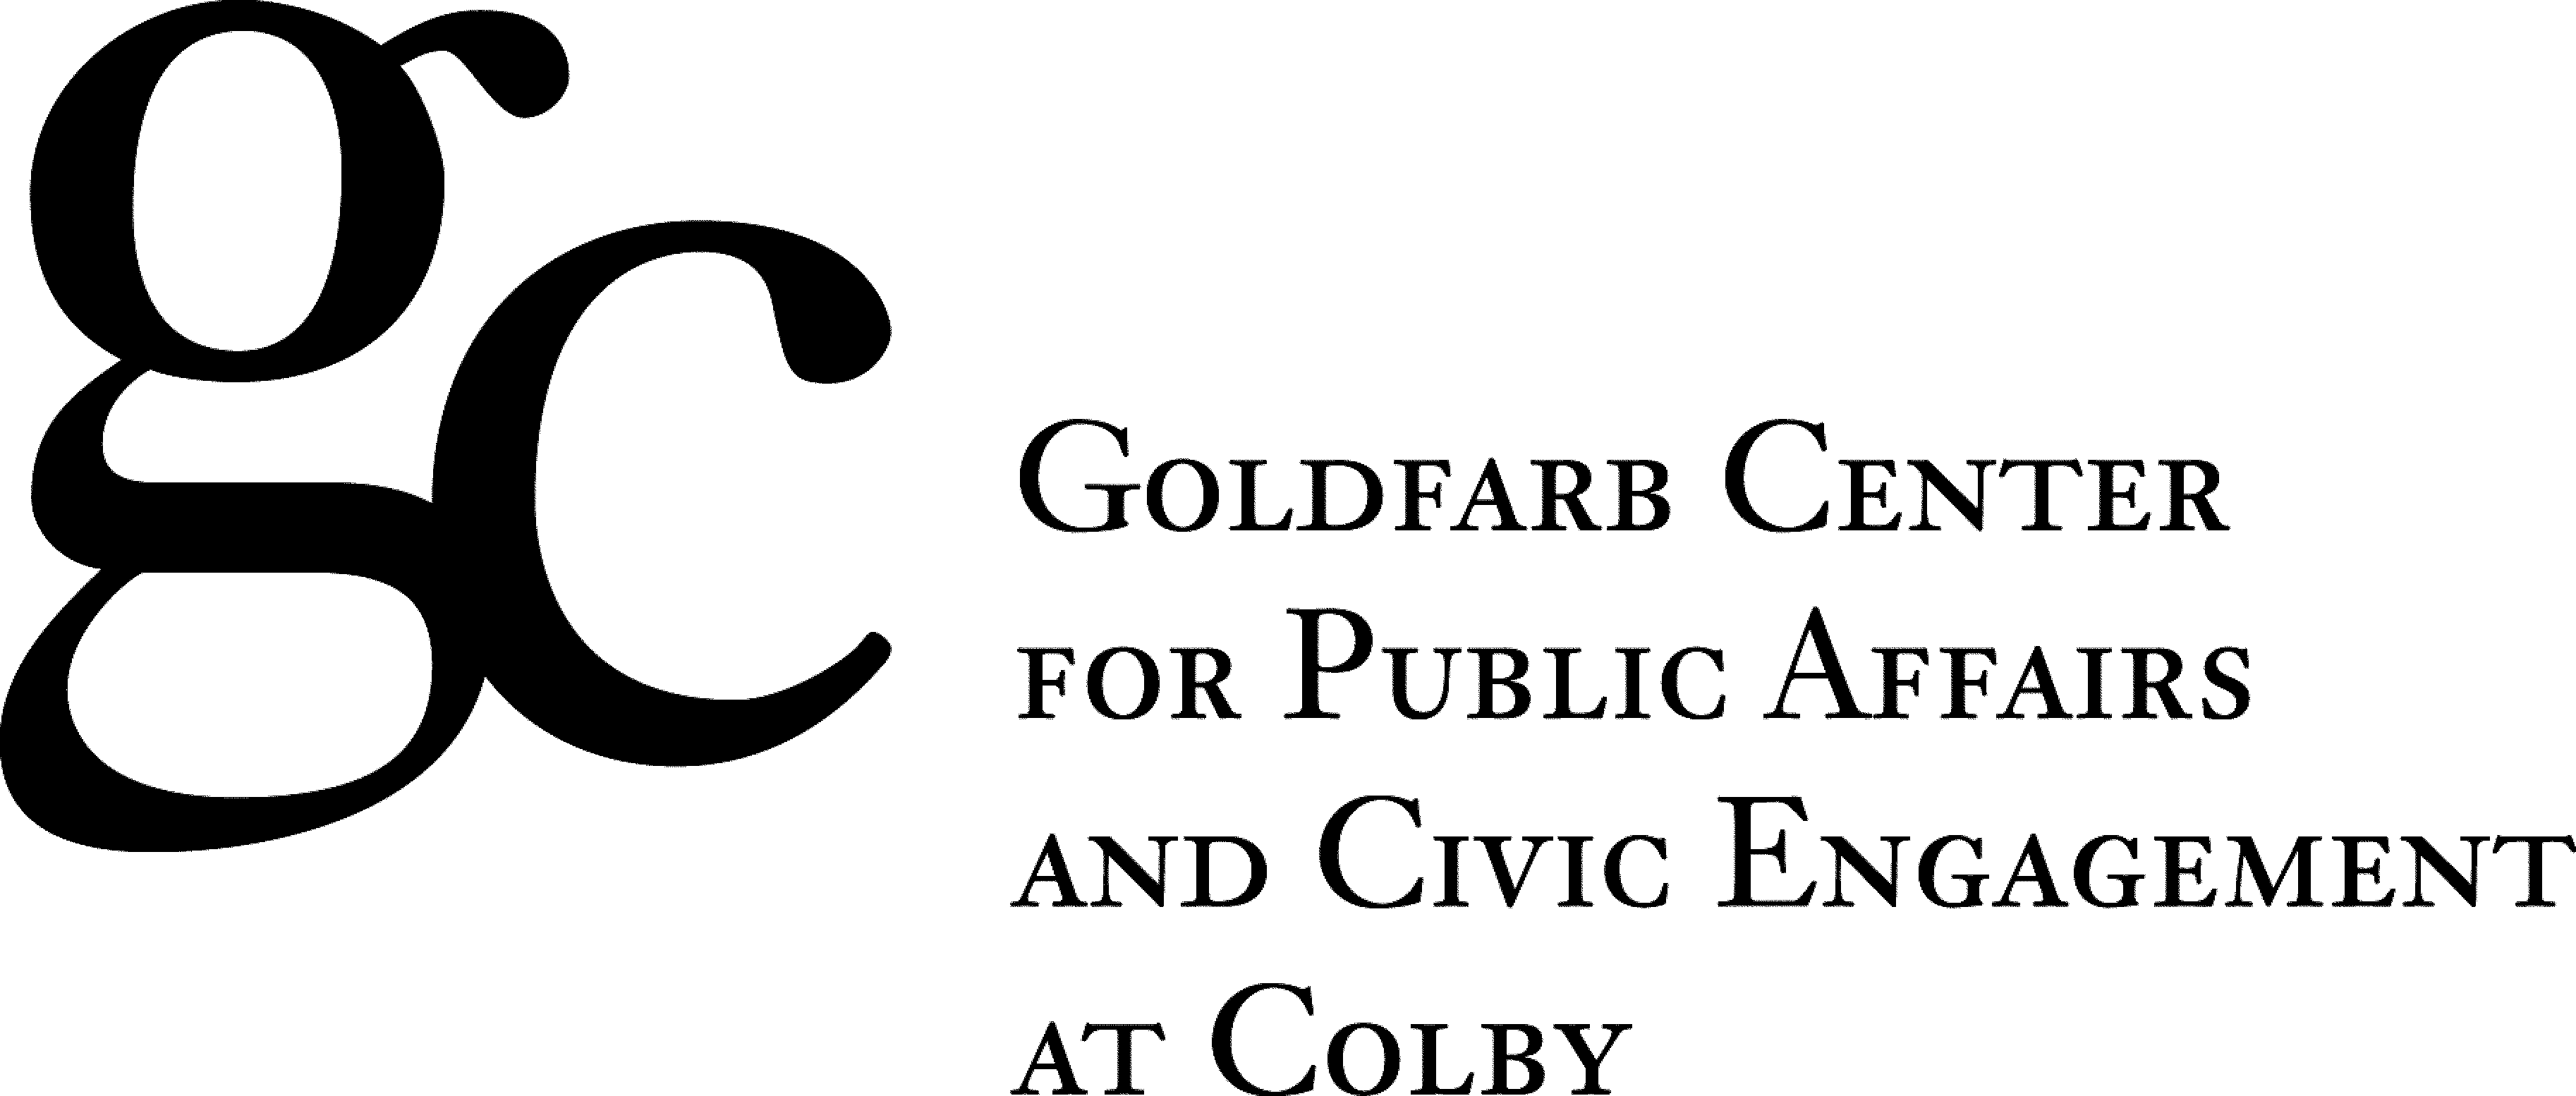 Colby - goldfarb ID